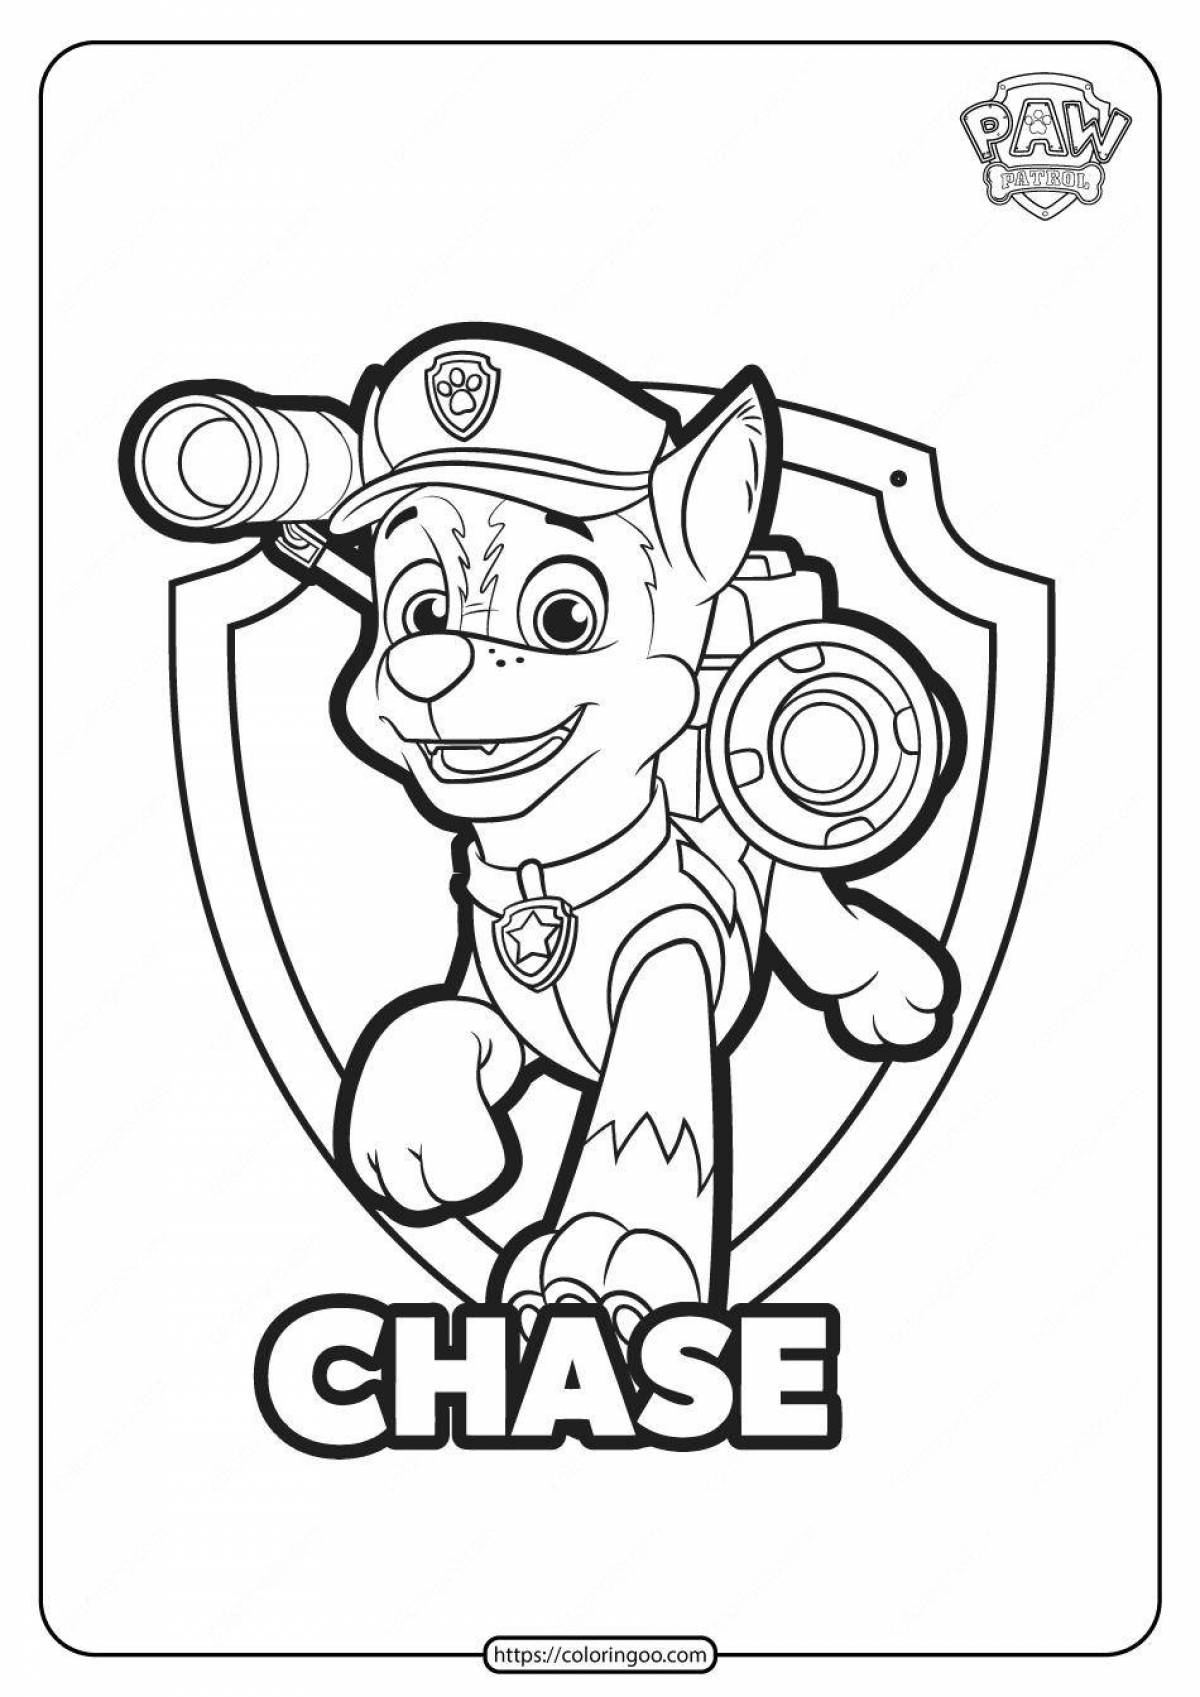 Cute paw patrol tower coloring page